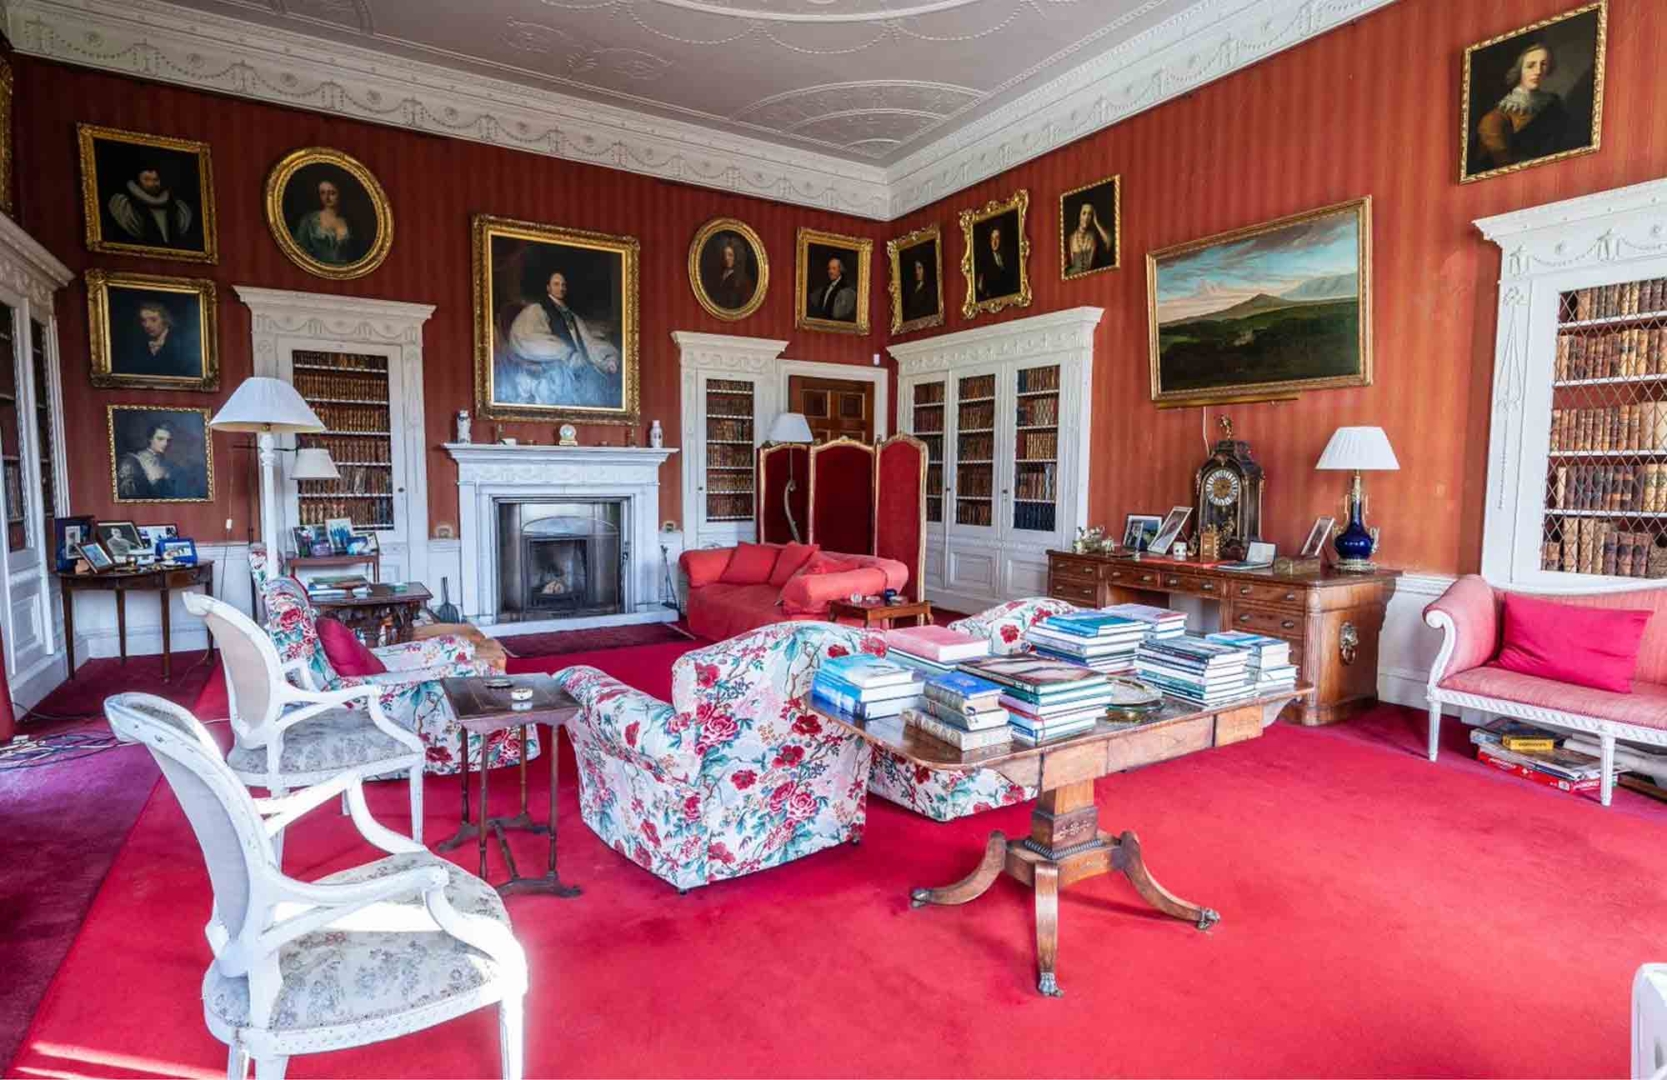 Curraghmore renovations and evolutions never stopped in eight centuries